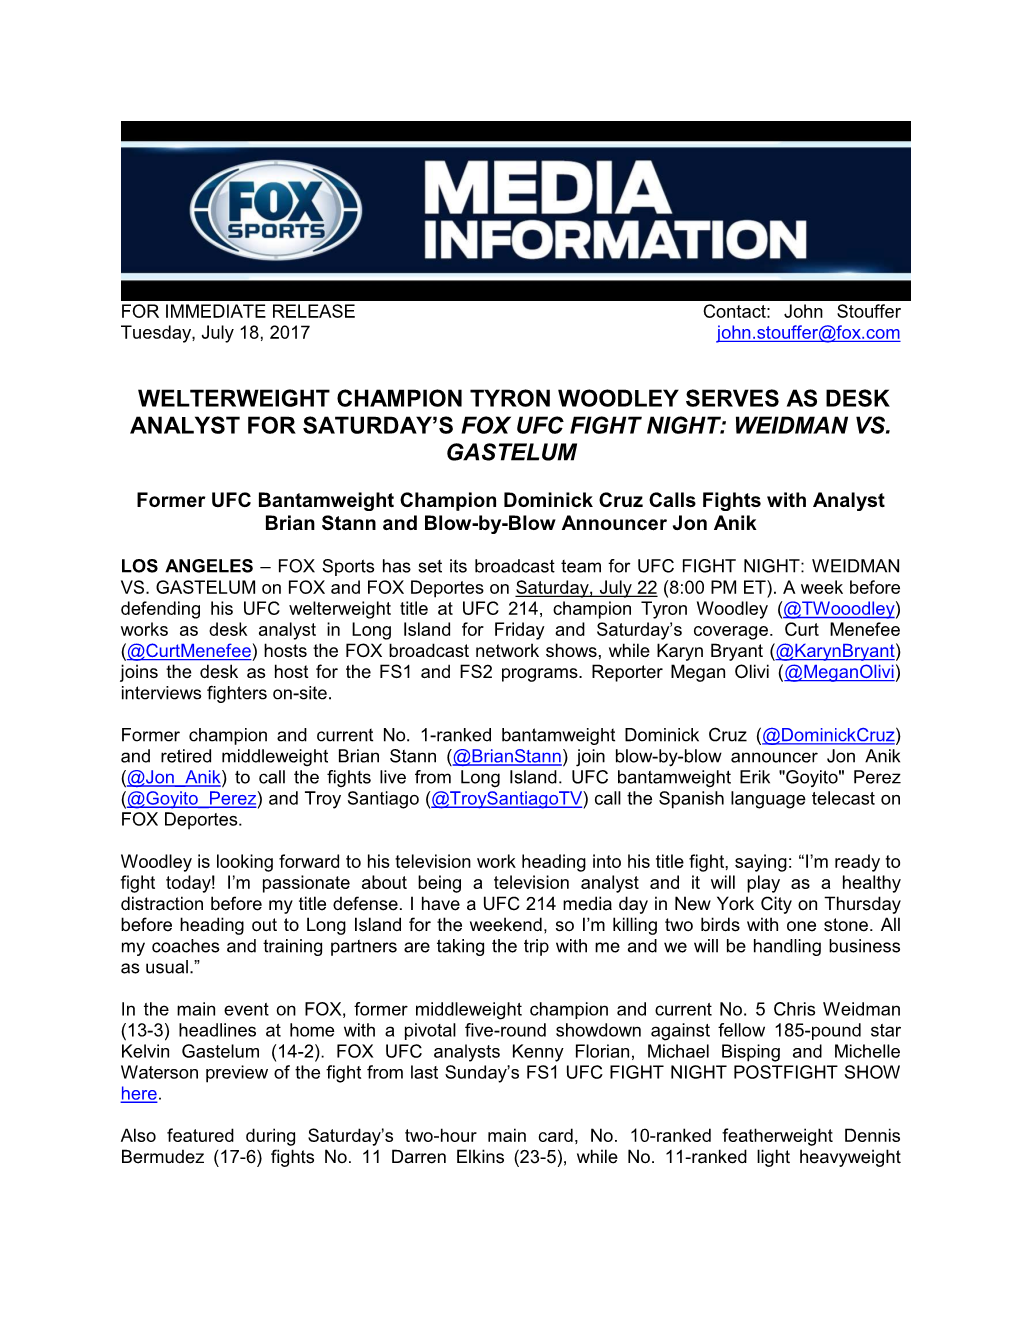 Welterweight Champion Tyron Woodley Serves As Desk Analyst for Saturday’S Fox Ufc Fight Night: Weidman Vs